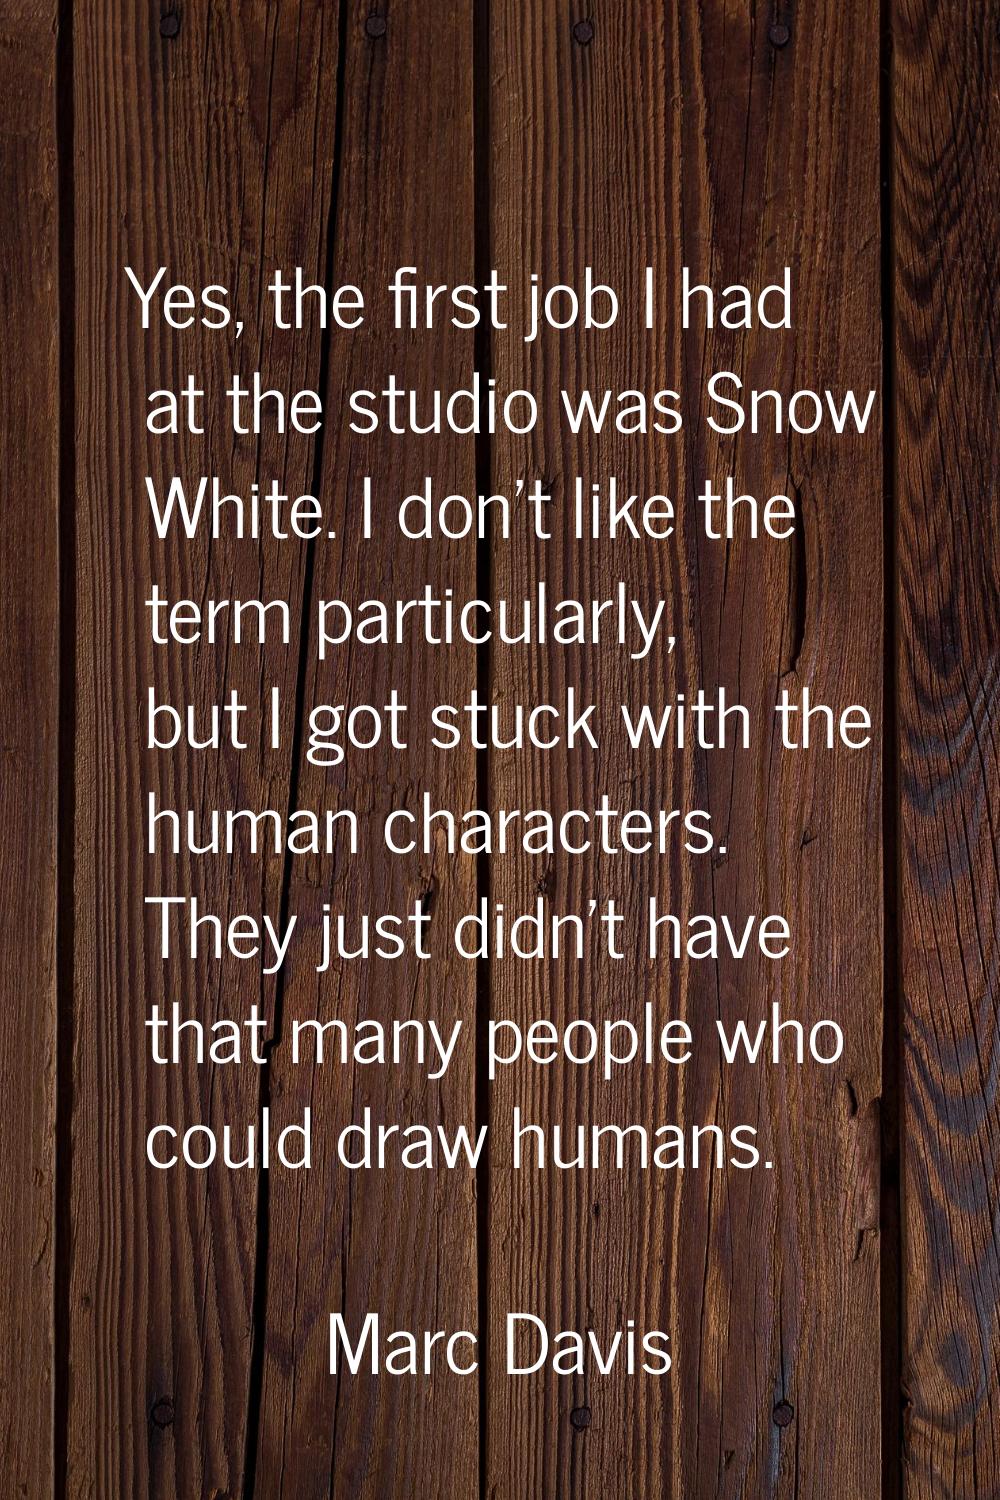 Yes, the first job I had at the studio was Snow White. I don't like the term particularly, but I go